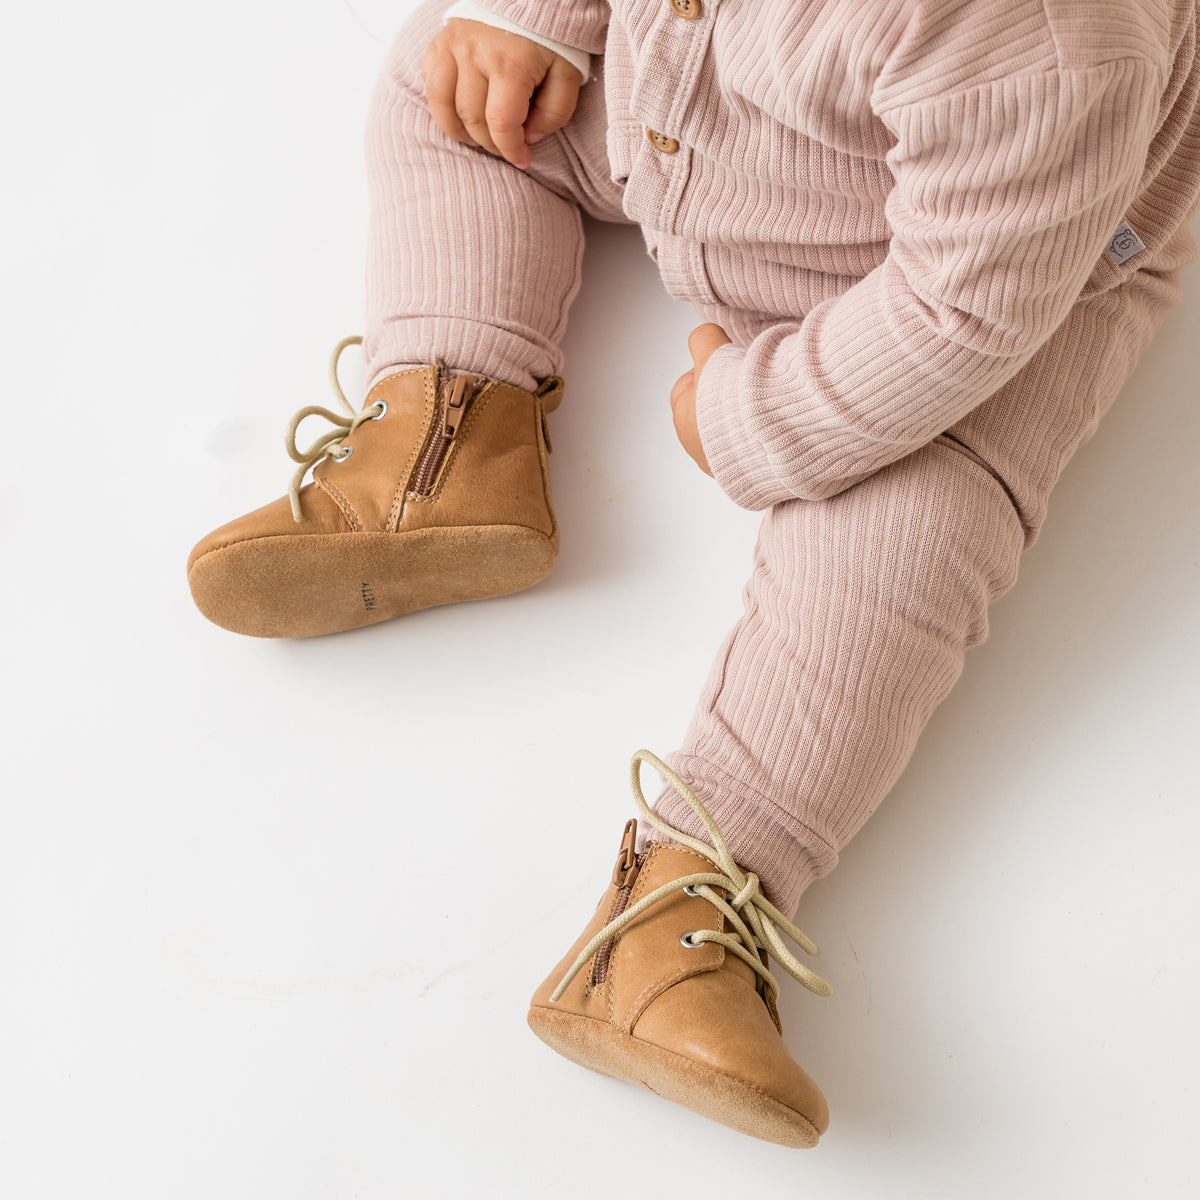 Toddler wearing Tan boots with white laces